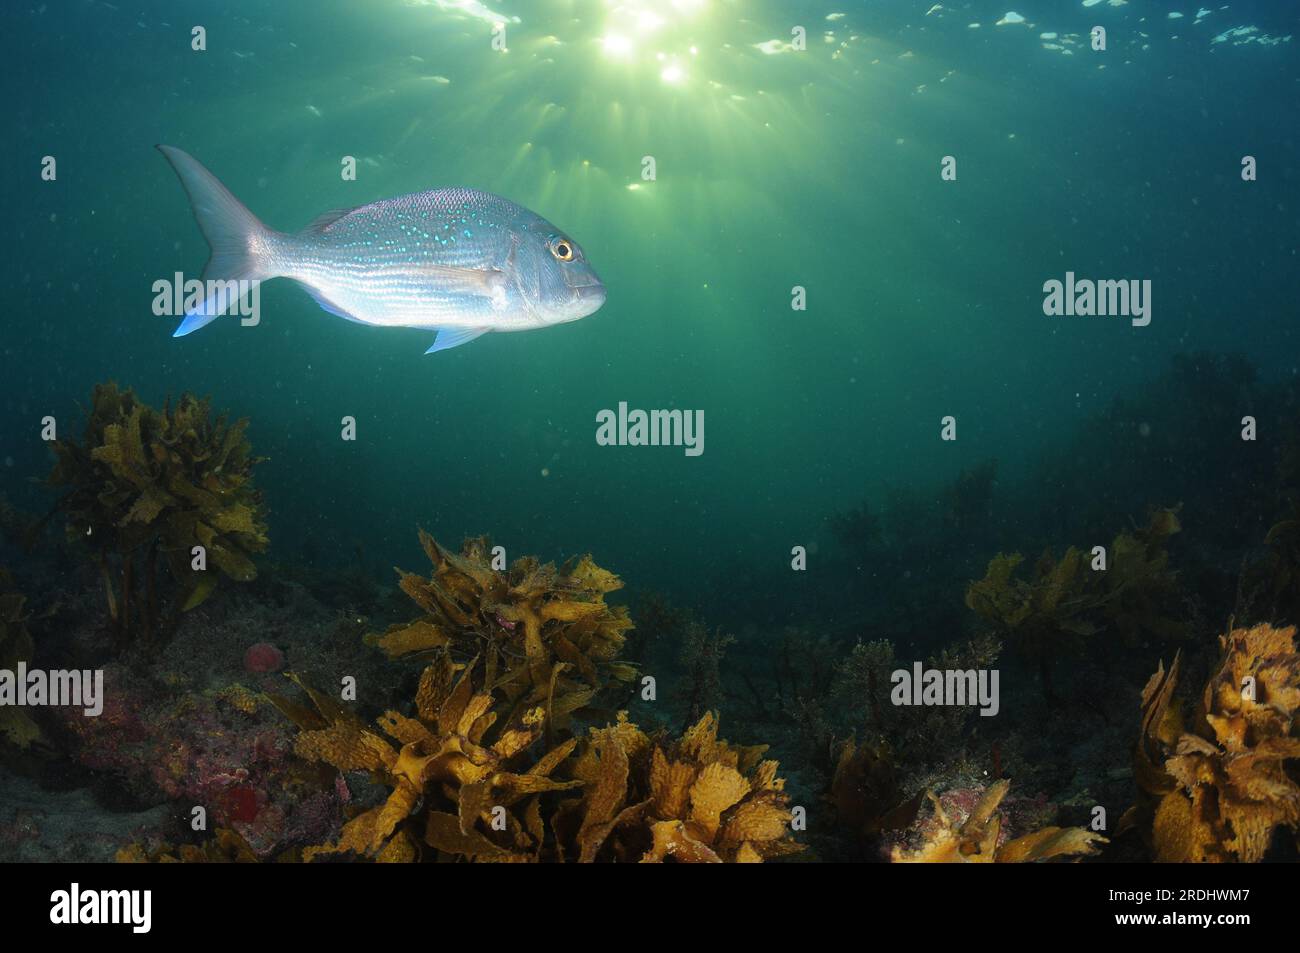 Silver Australasian snapper Pagrus auratus above shallow rocky reef covered with kelp. Location: Leigh New Zealand Stock Photo